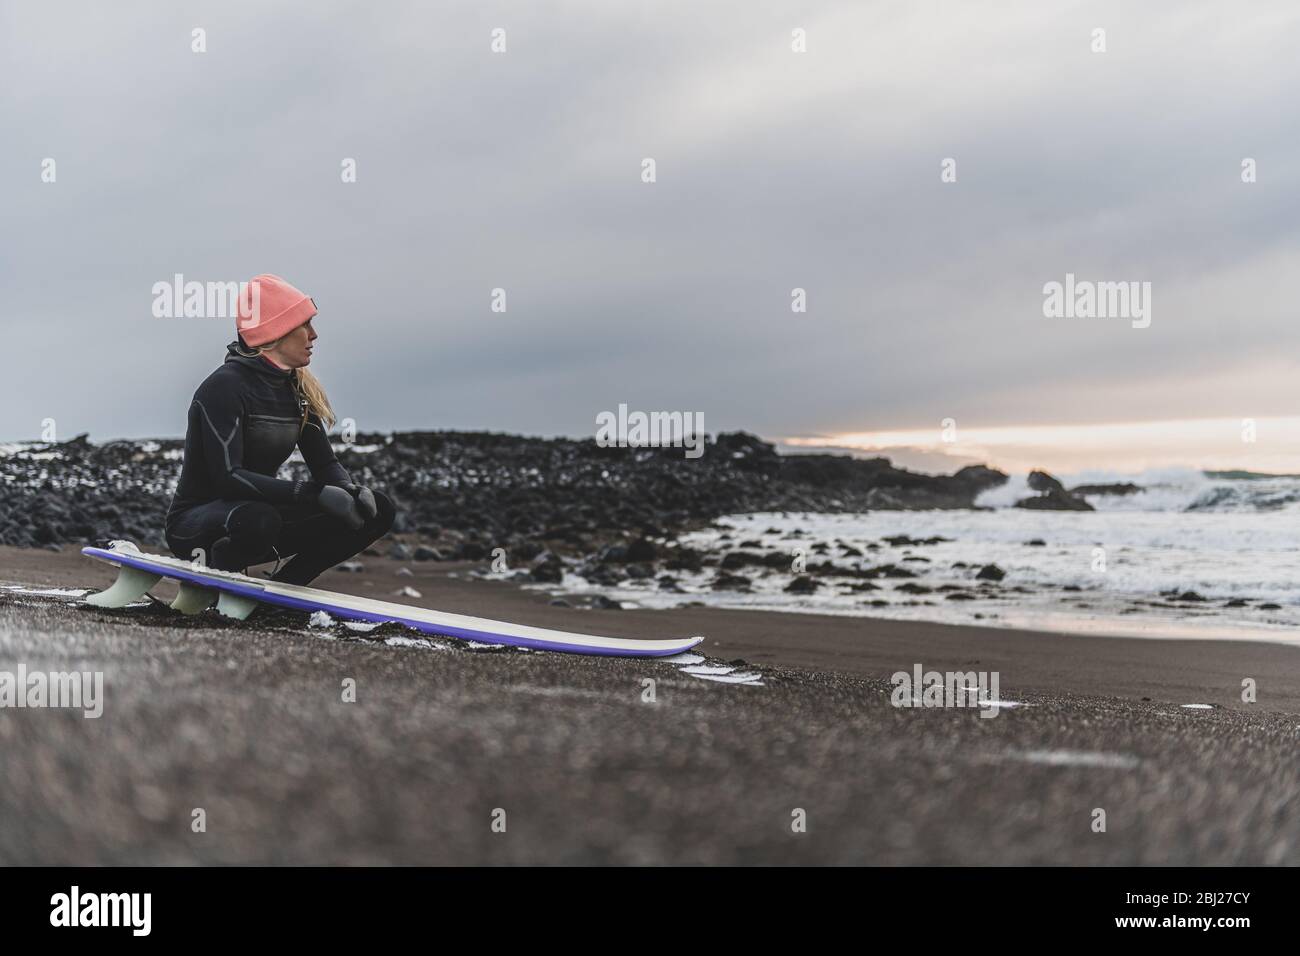 A woman sitting on her surfboard on a beach looking out to sea. Stock Photo